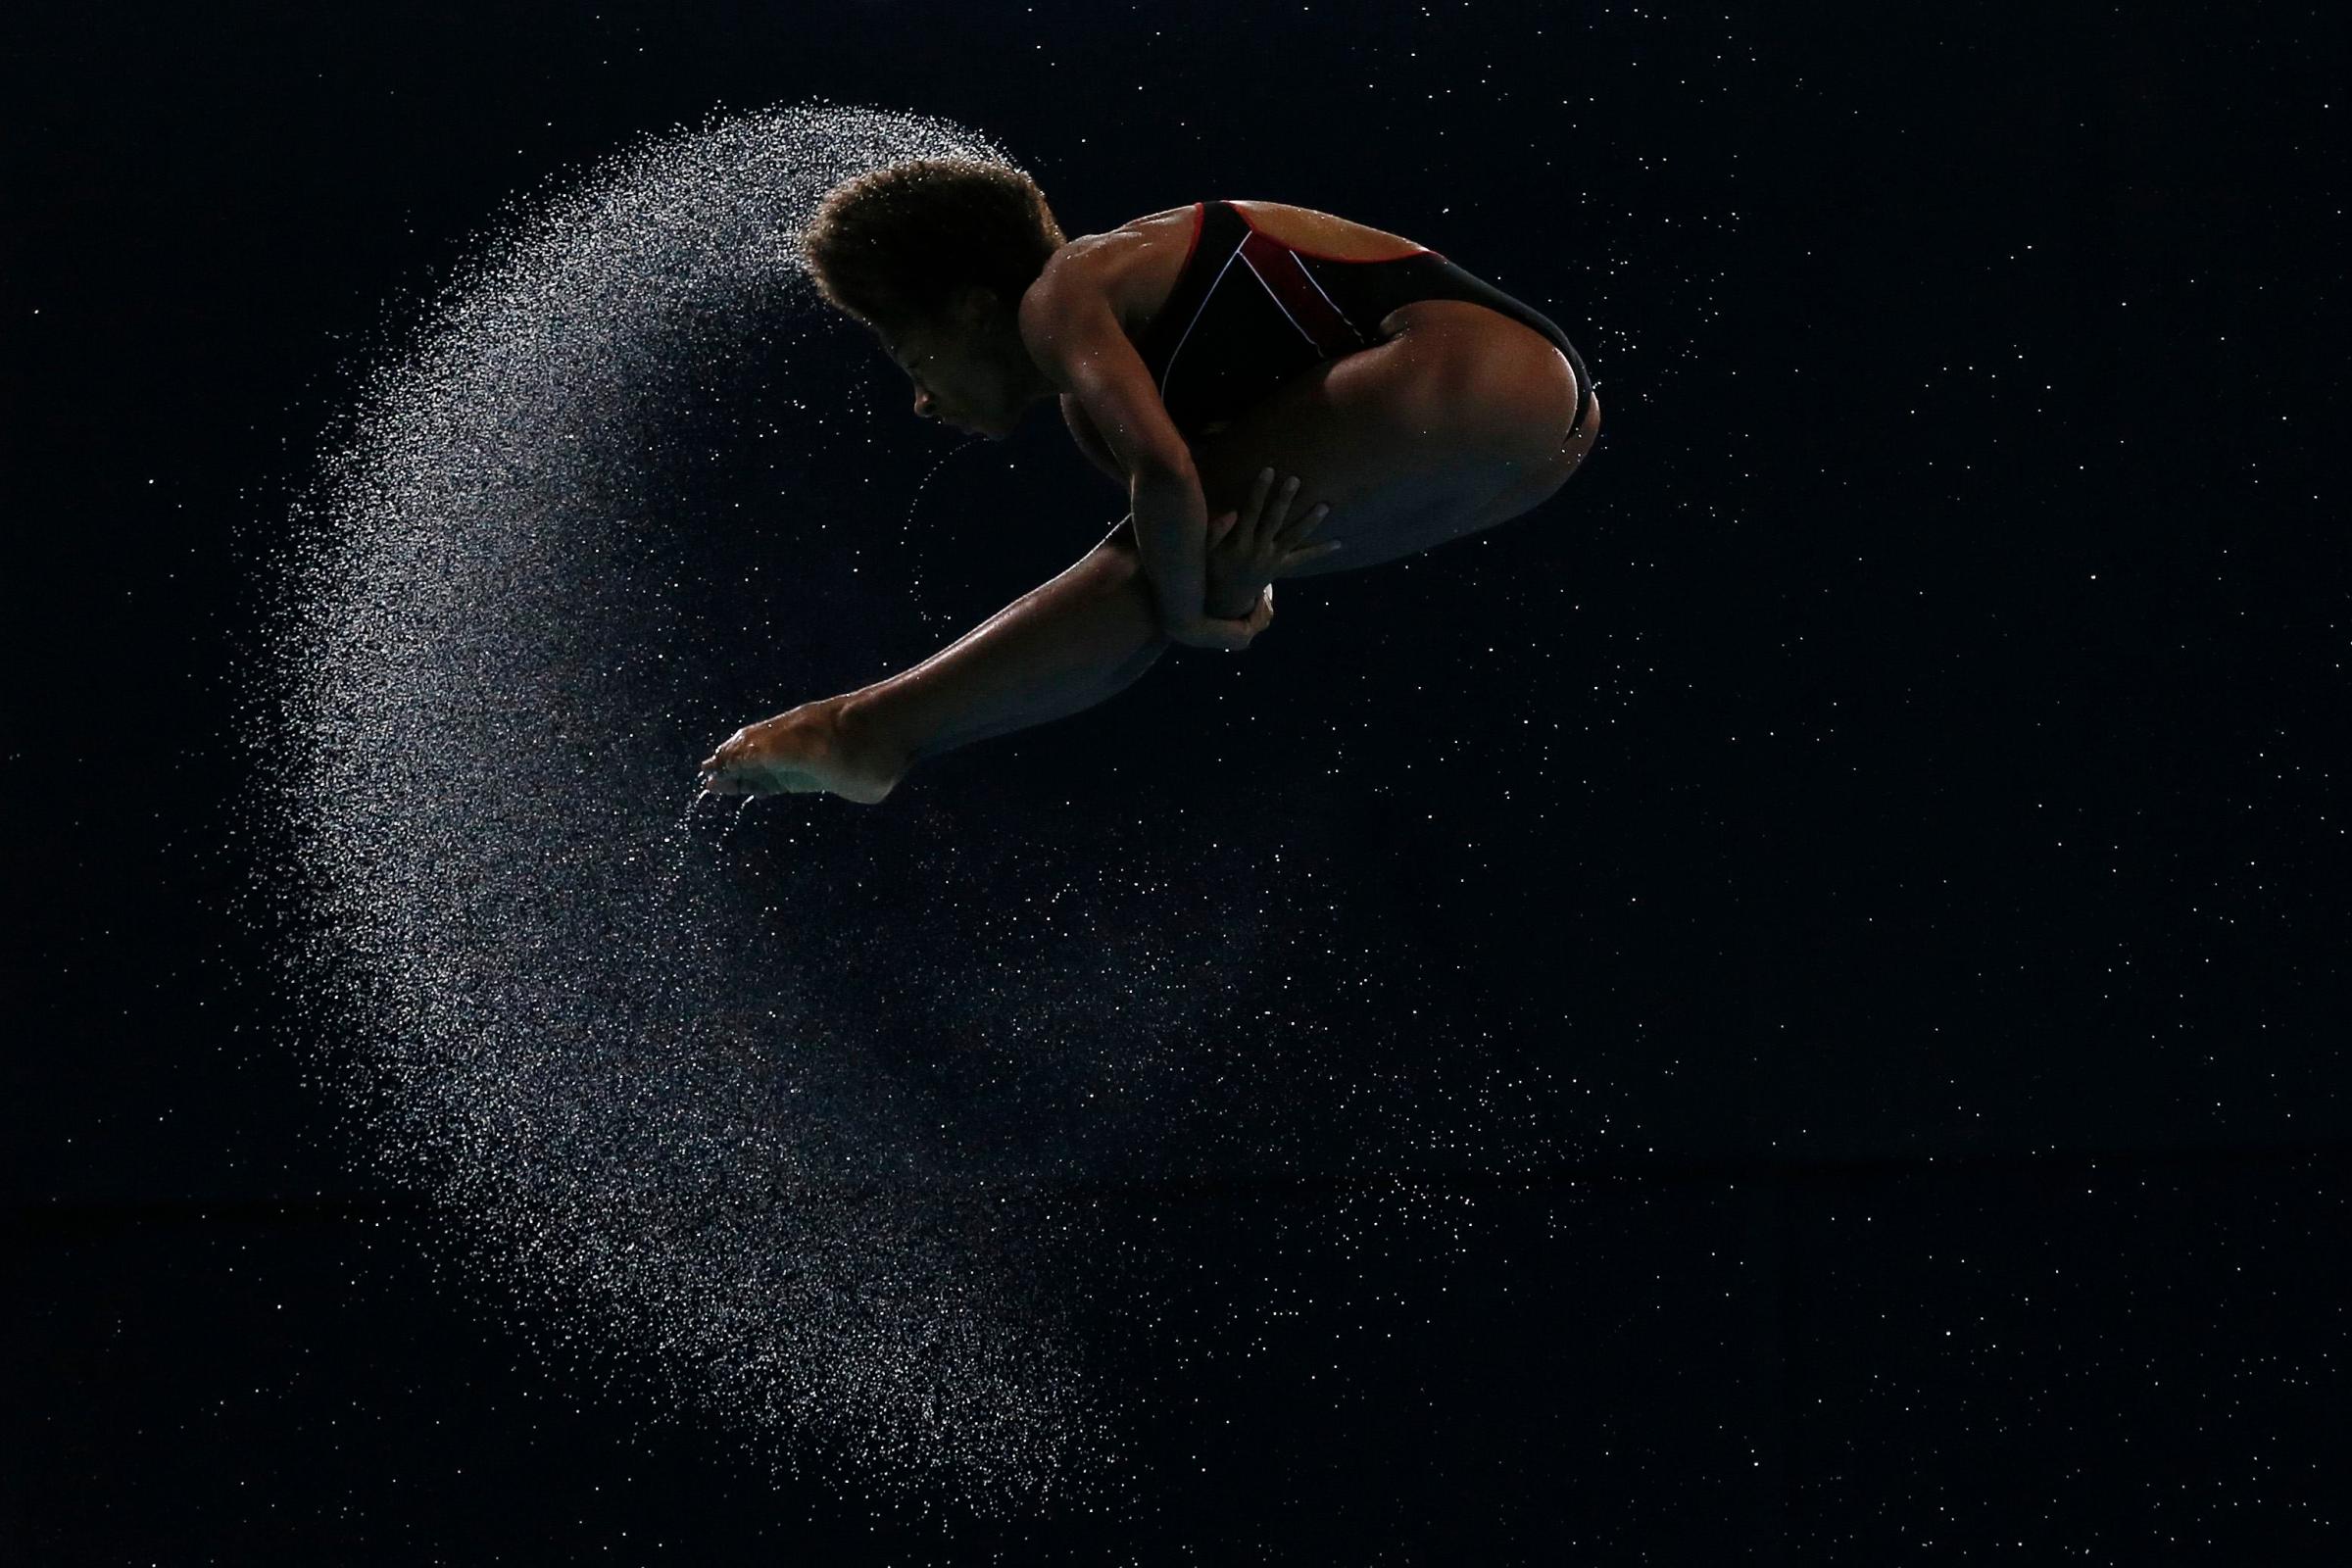 Abel of Canada dives during the women's 3m Springboard final at the 2014 Commonwealth Games in Edinburgh